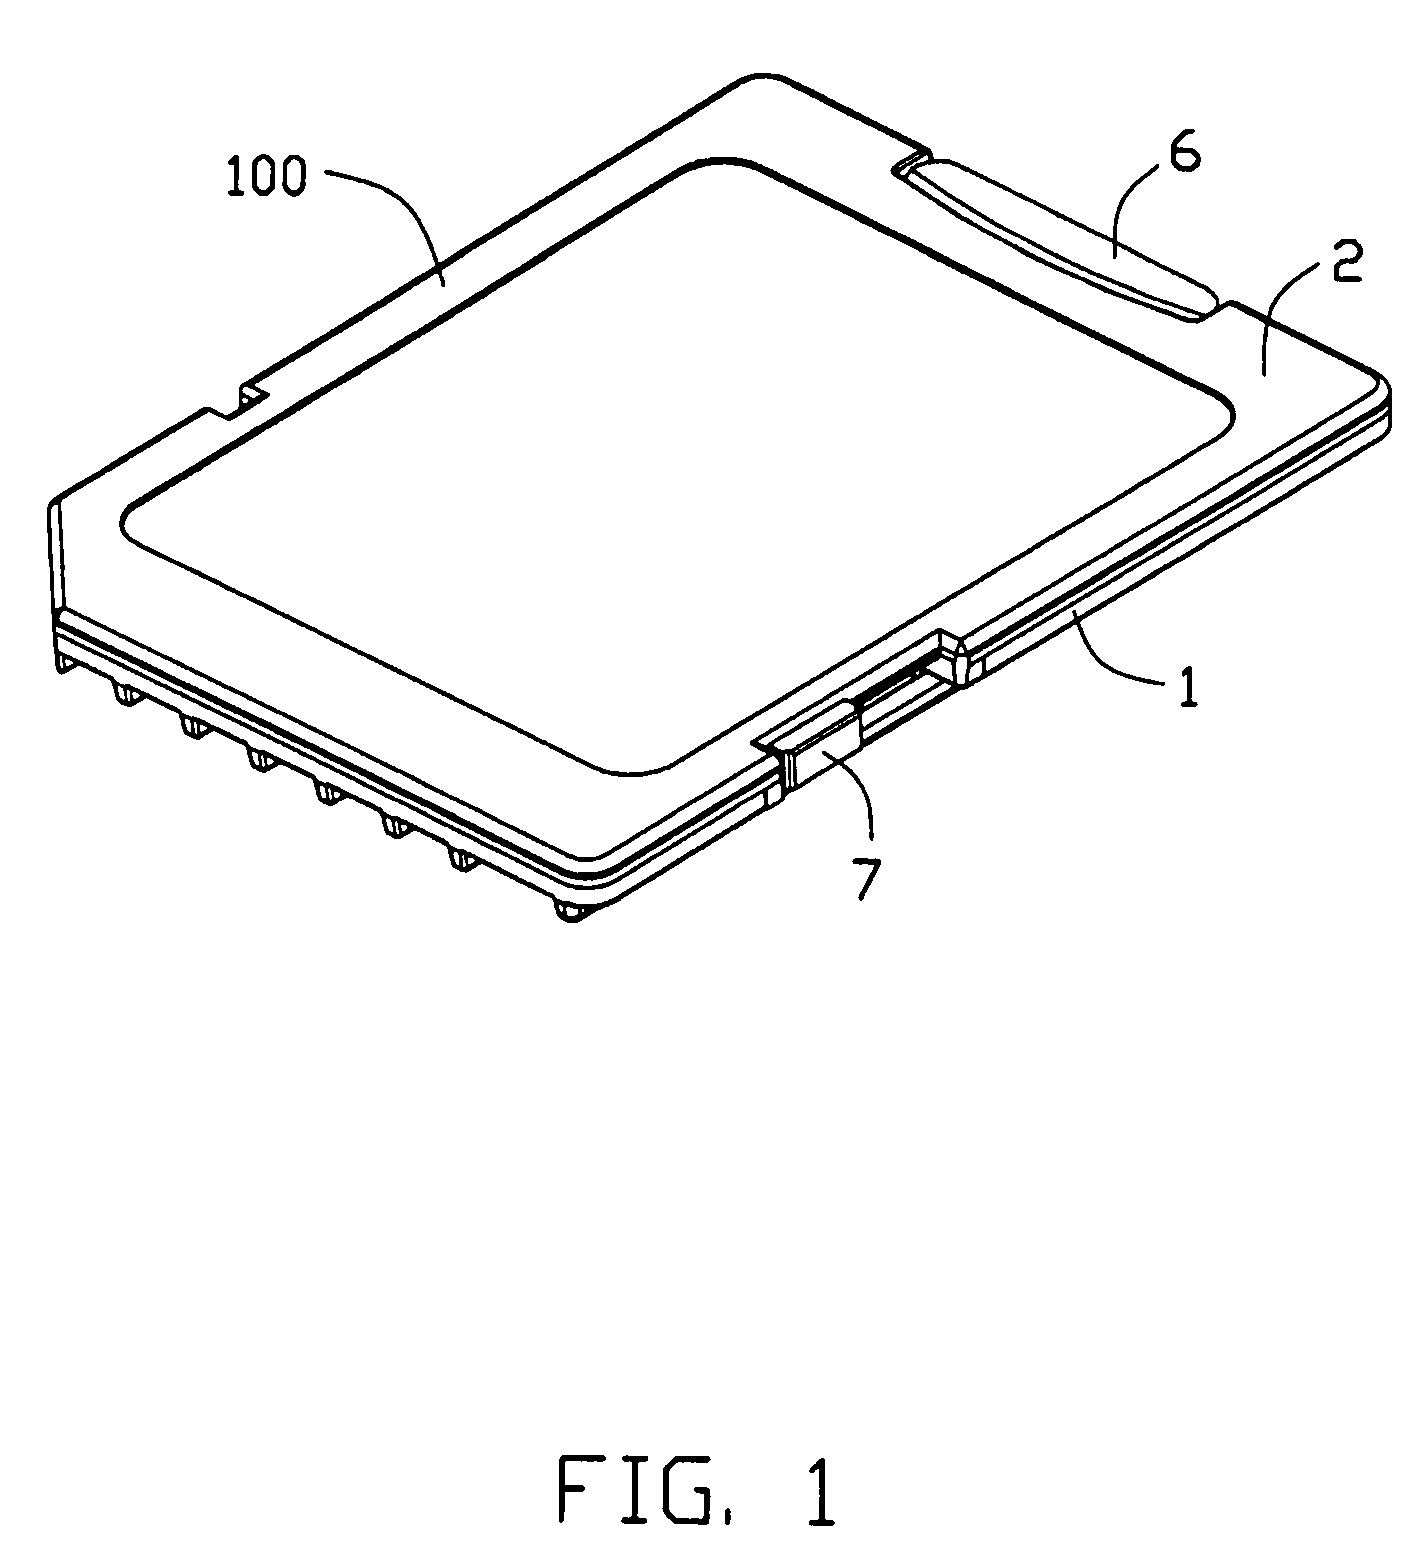 Memory card adapter with improved locking mechanism for mating with a mini memory card